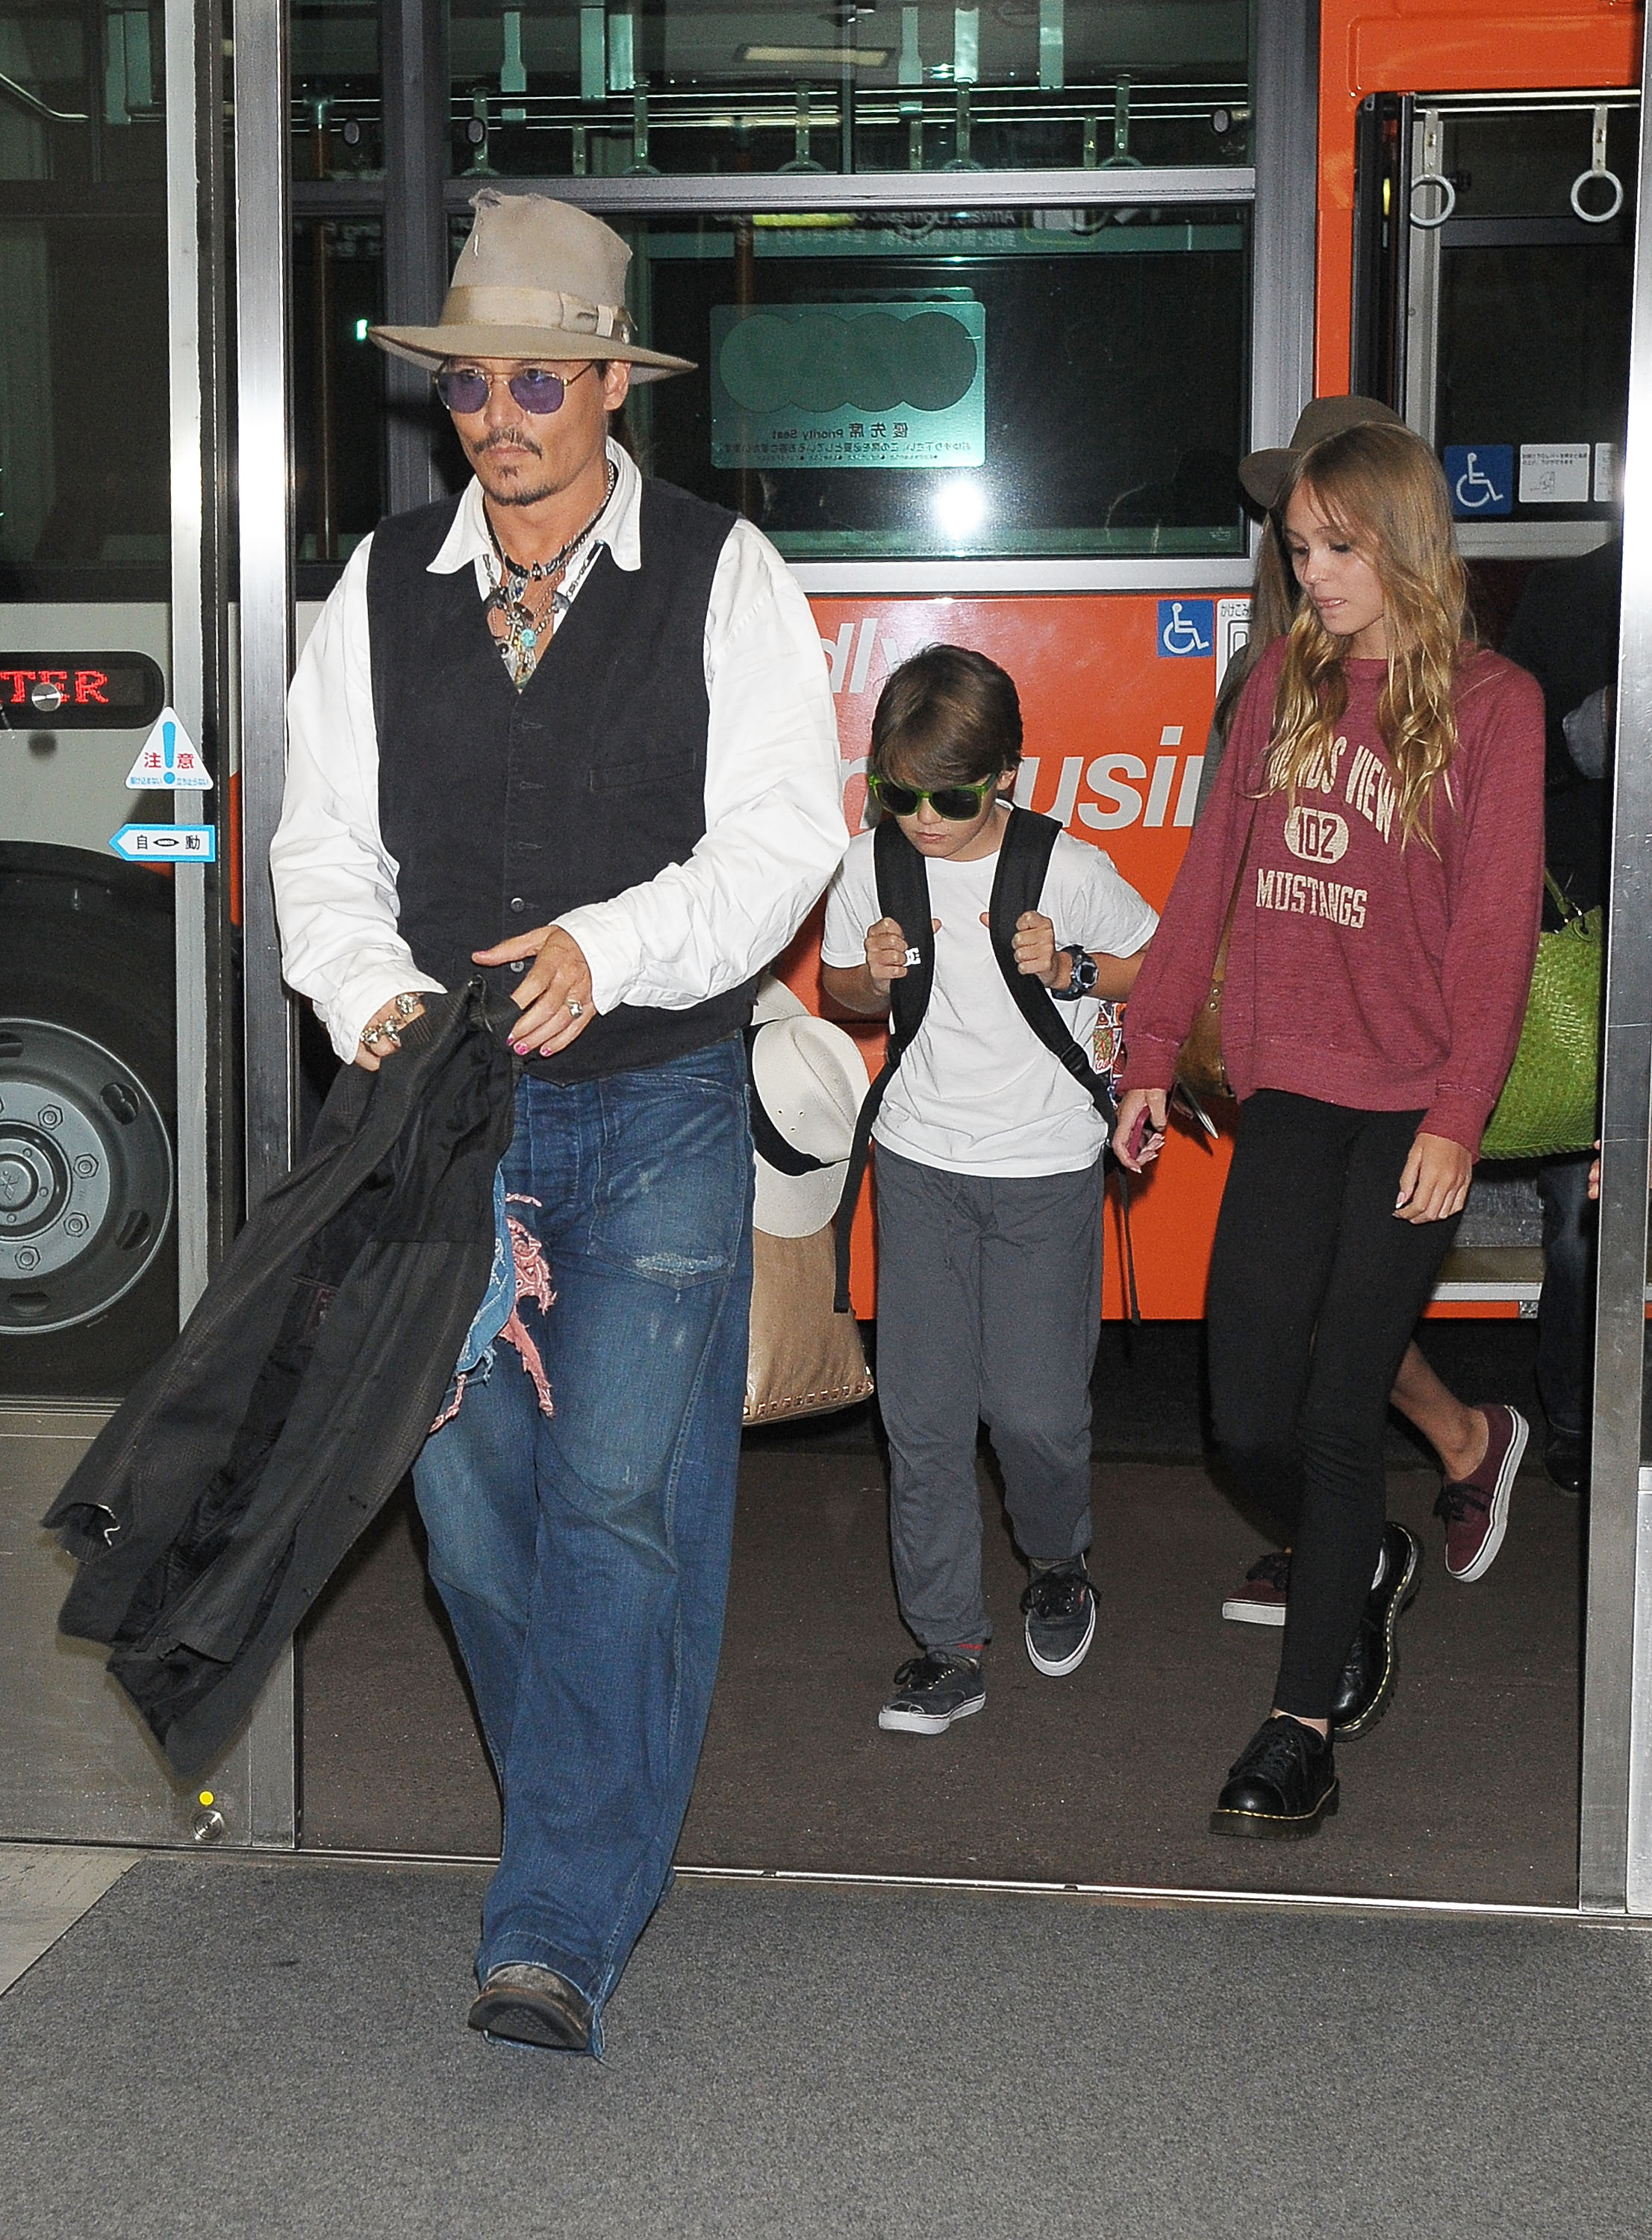 Johnny Depp, Jack Depp and Lily-Rose Melody Depp pictured arriving at Narita International Airport on July 16, 2013 in Narita, Japan. / Source: Getty Images